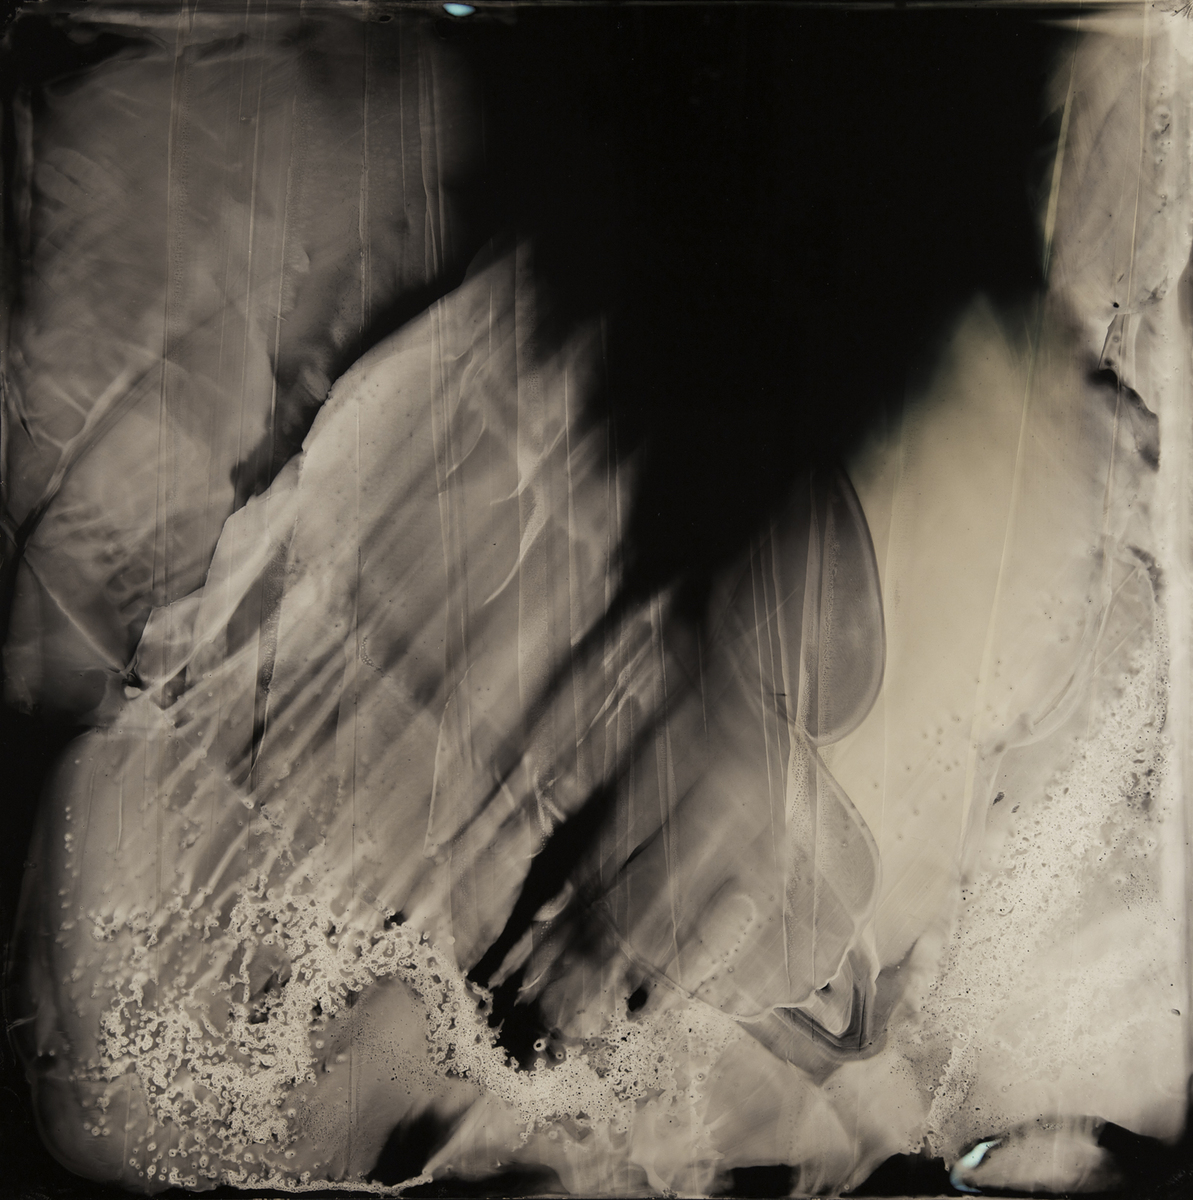 10:47 PM, April 9, 2015. Collodion tintype, 14x14 inches.